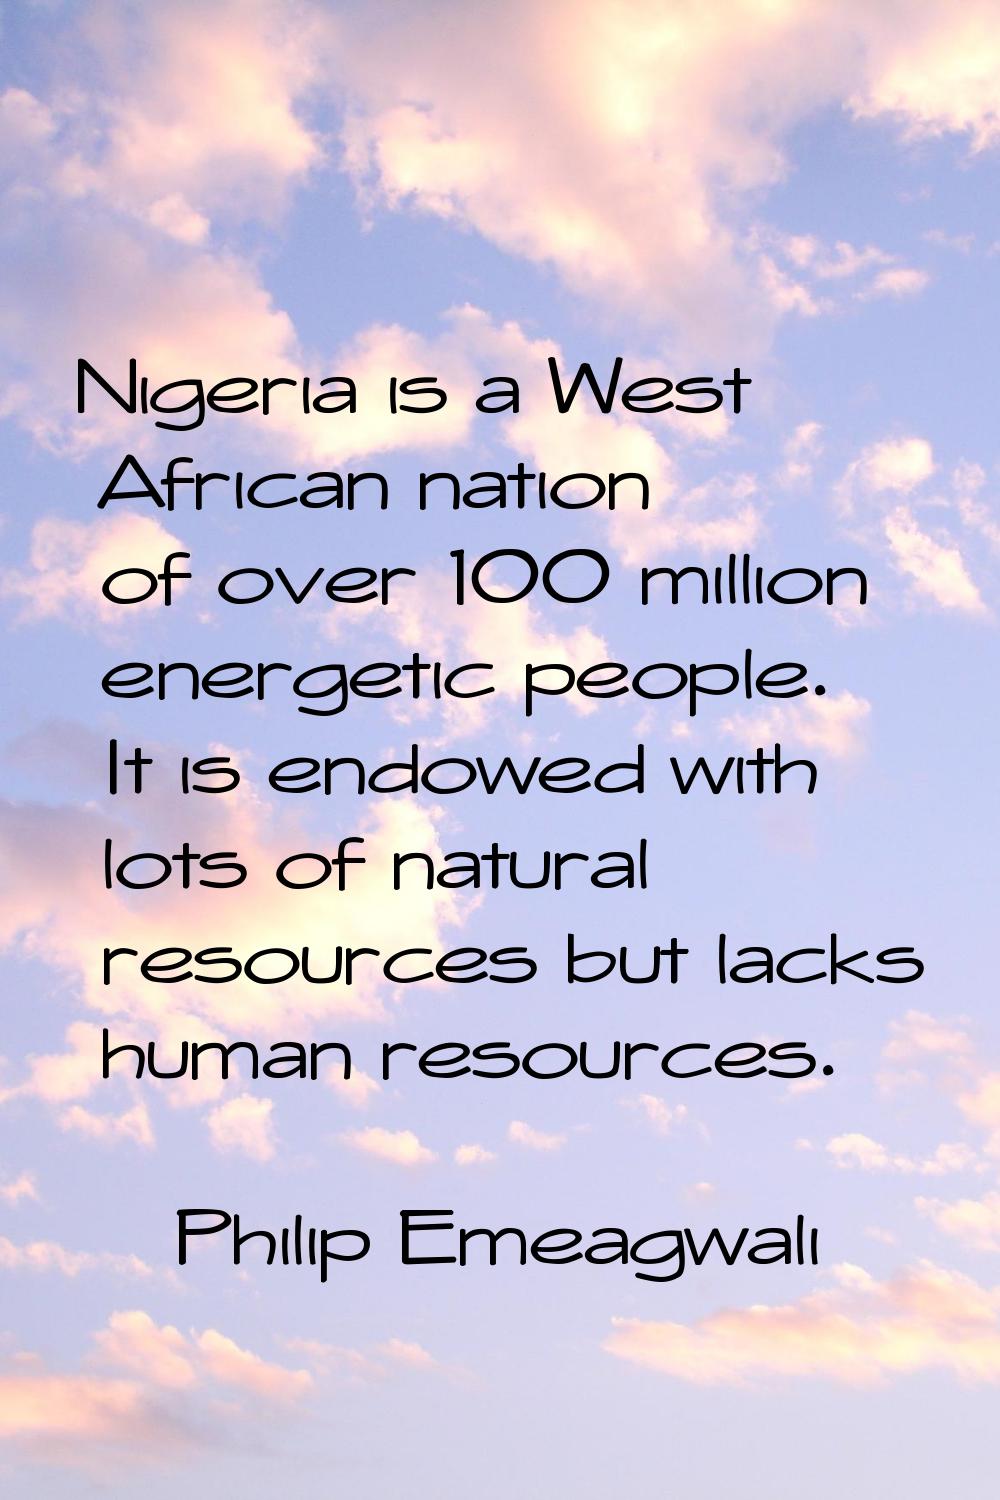 Nigeria is a West African nation of over 100 million energetic people. It is endowed with lots of n